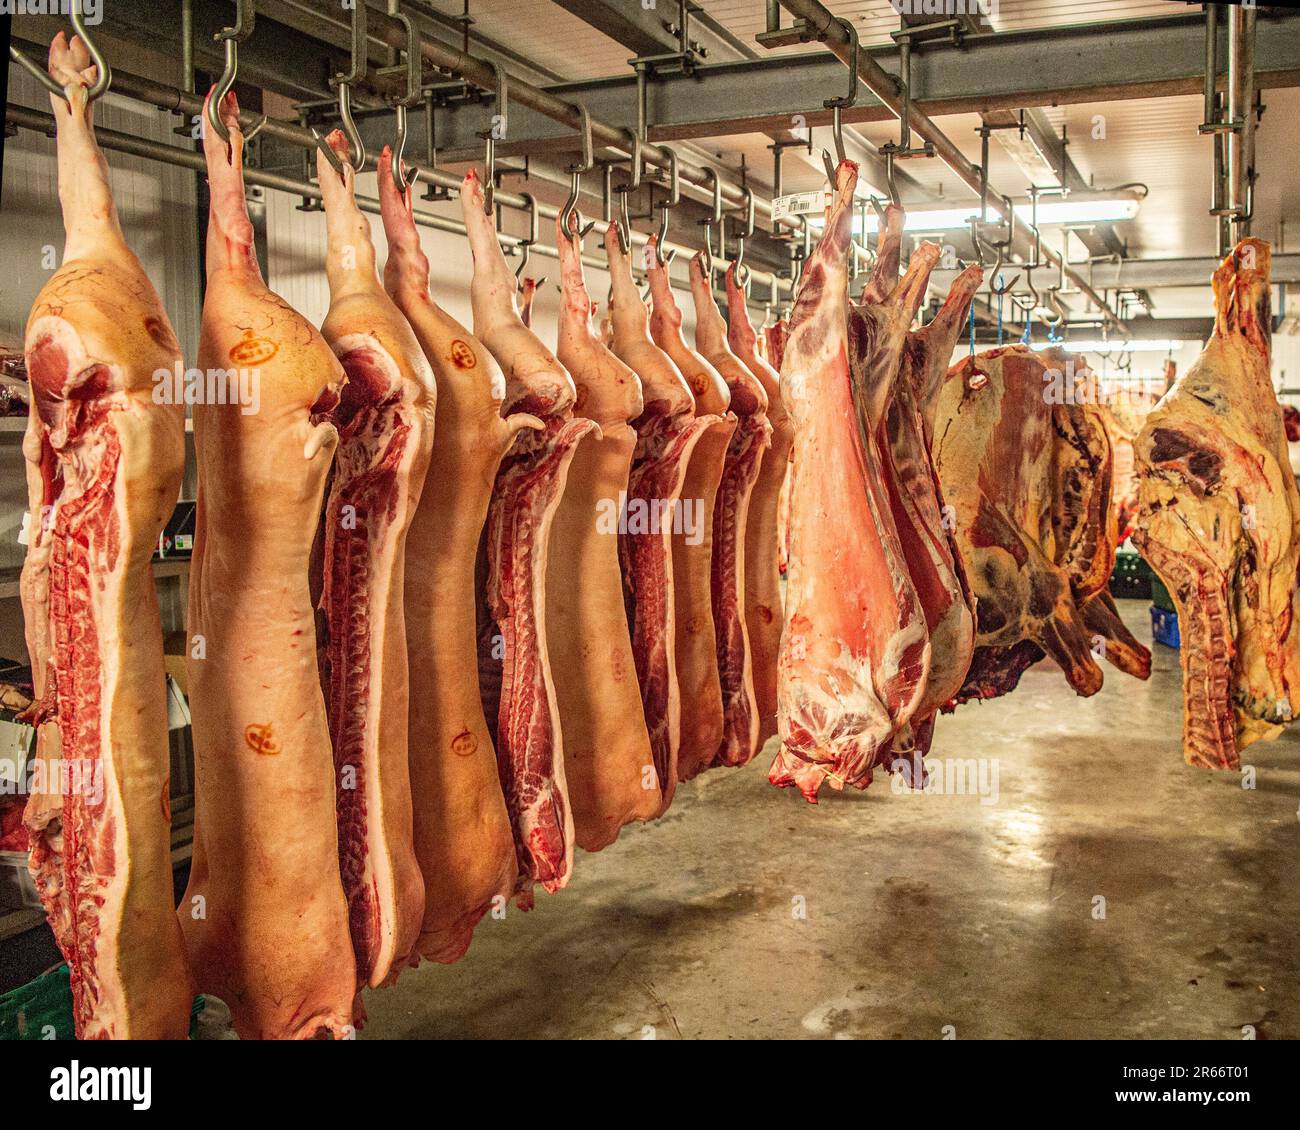 hanging room in a butchers Stock Photo